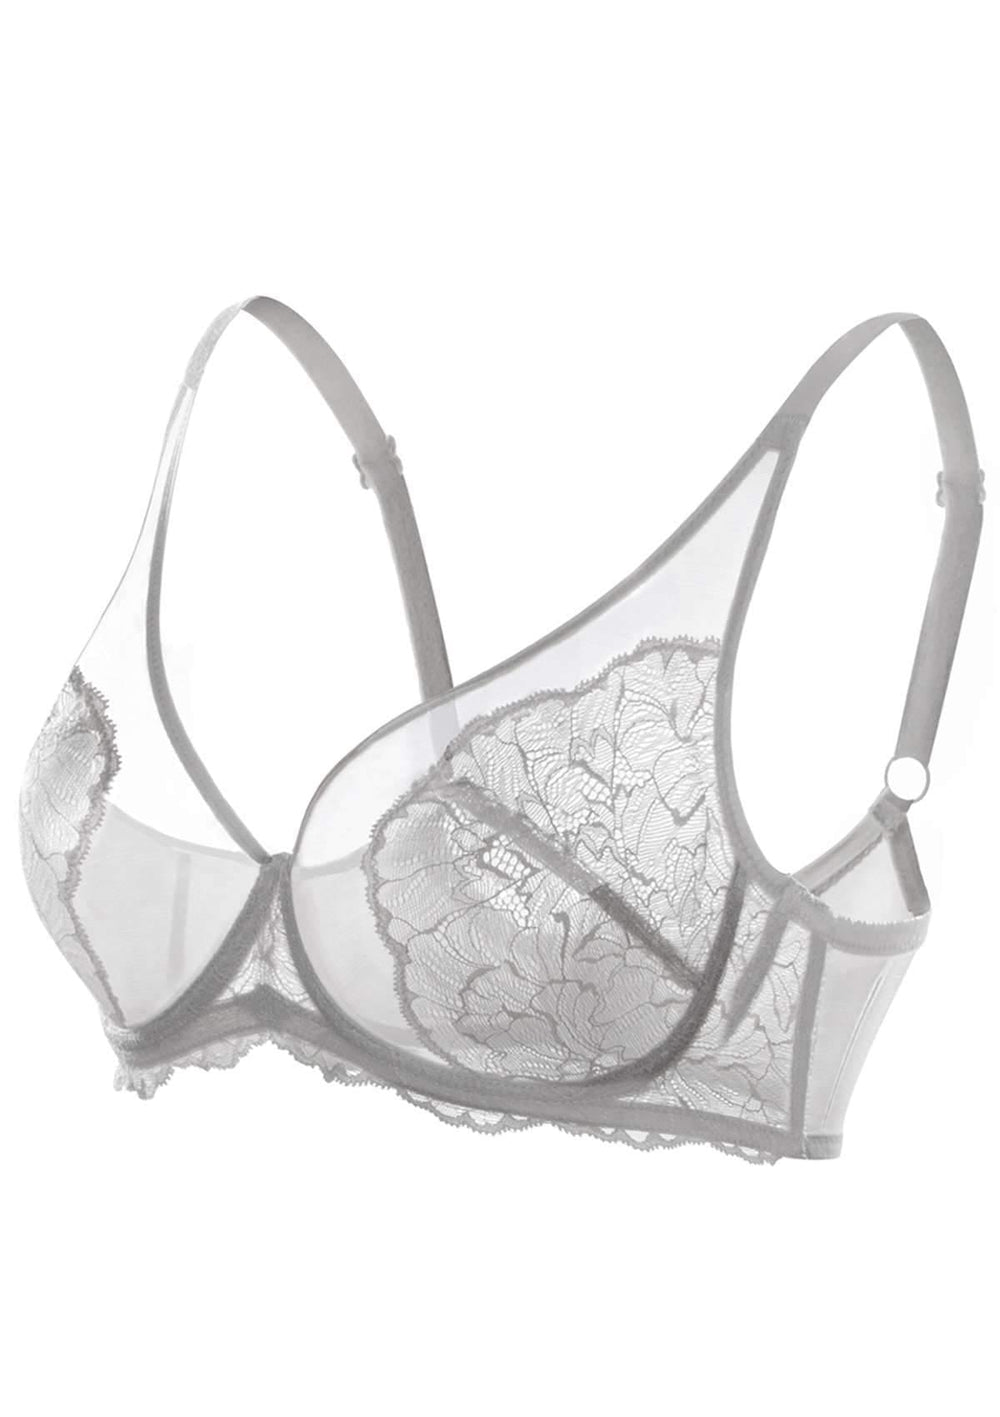 Buy online Grey Solid Regular Bra from lingerie for Women by In Care for  ₹379 at 16% off